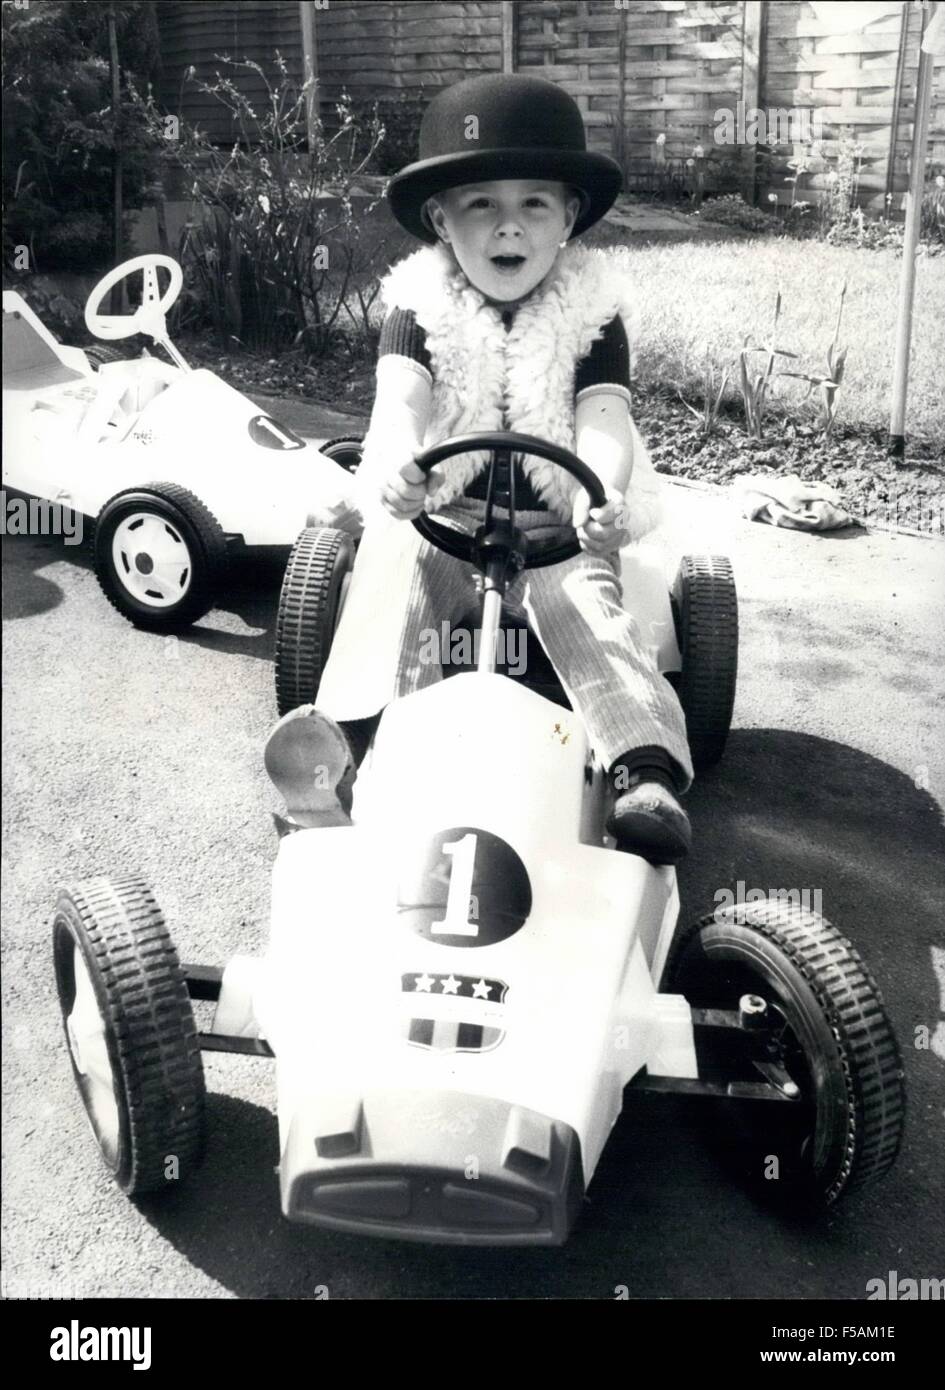 1968 - The Soft Sell From the 3 year old Tycoon.: ''No time to stop, I have some important clients to see!'' and with a Roar of Revs. the bowler hatted Super Salesman as away, off for another day's successful business in his Turbo Jet Powered Company Car. 3 year old James zoom away at an incredible 4 MPH, round to the garage where he demonstrates his superb Salemanship. Tripping his Boweler hat at a dignified, authoratitive angle he points the attributes of the Canadian made Turbo Jet Car, powered with rechargeable Solid Gel Batteries.''Look, No pedals'' he say's as he careers round the garden Stock Photo